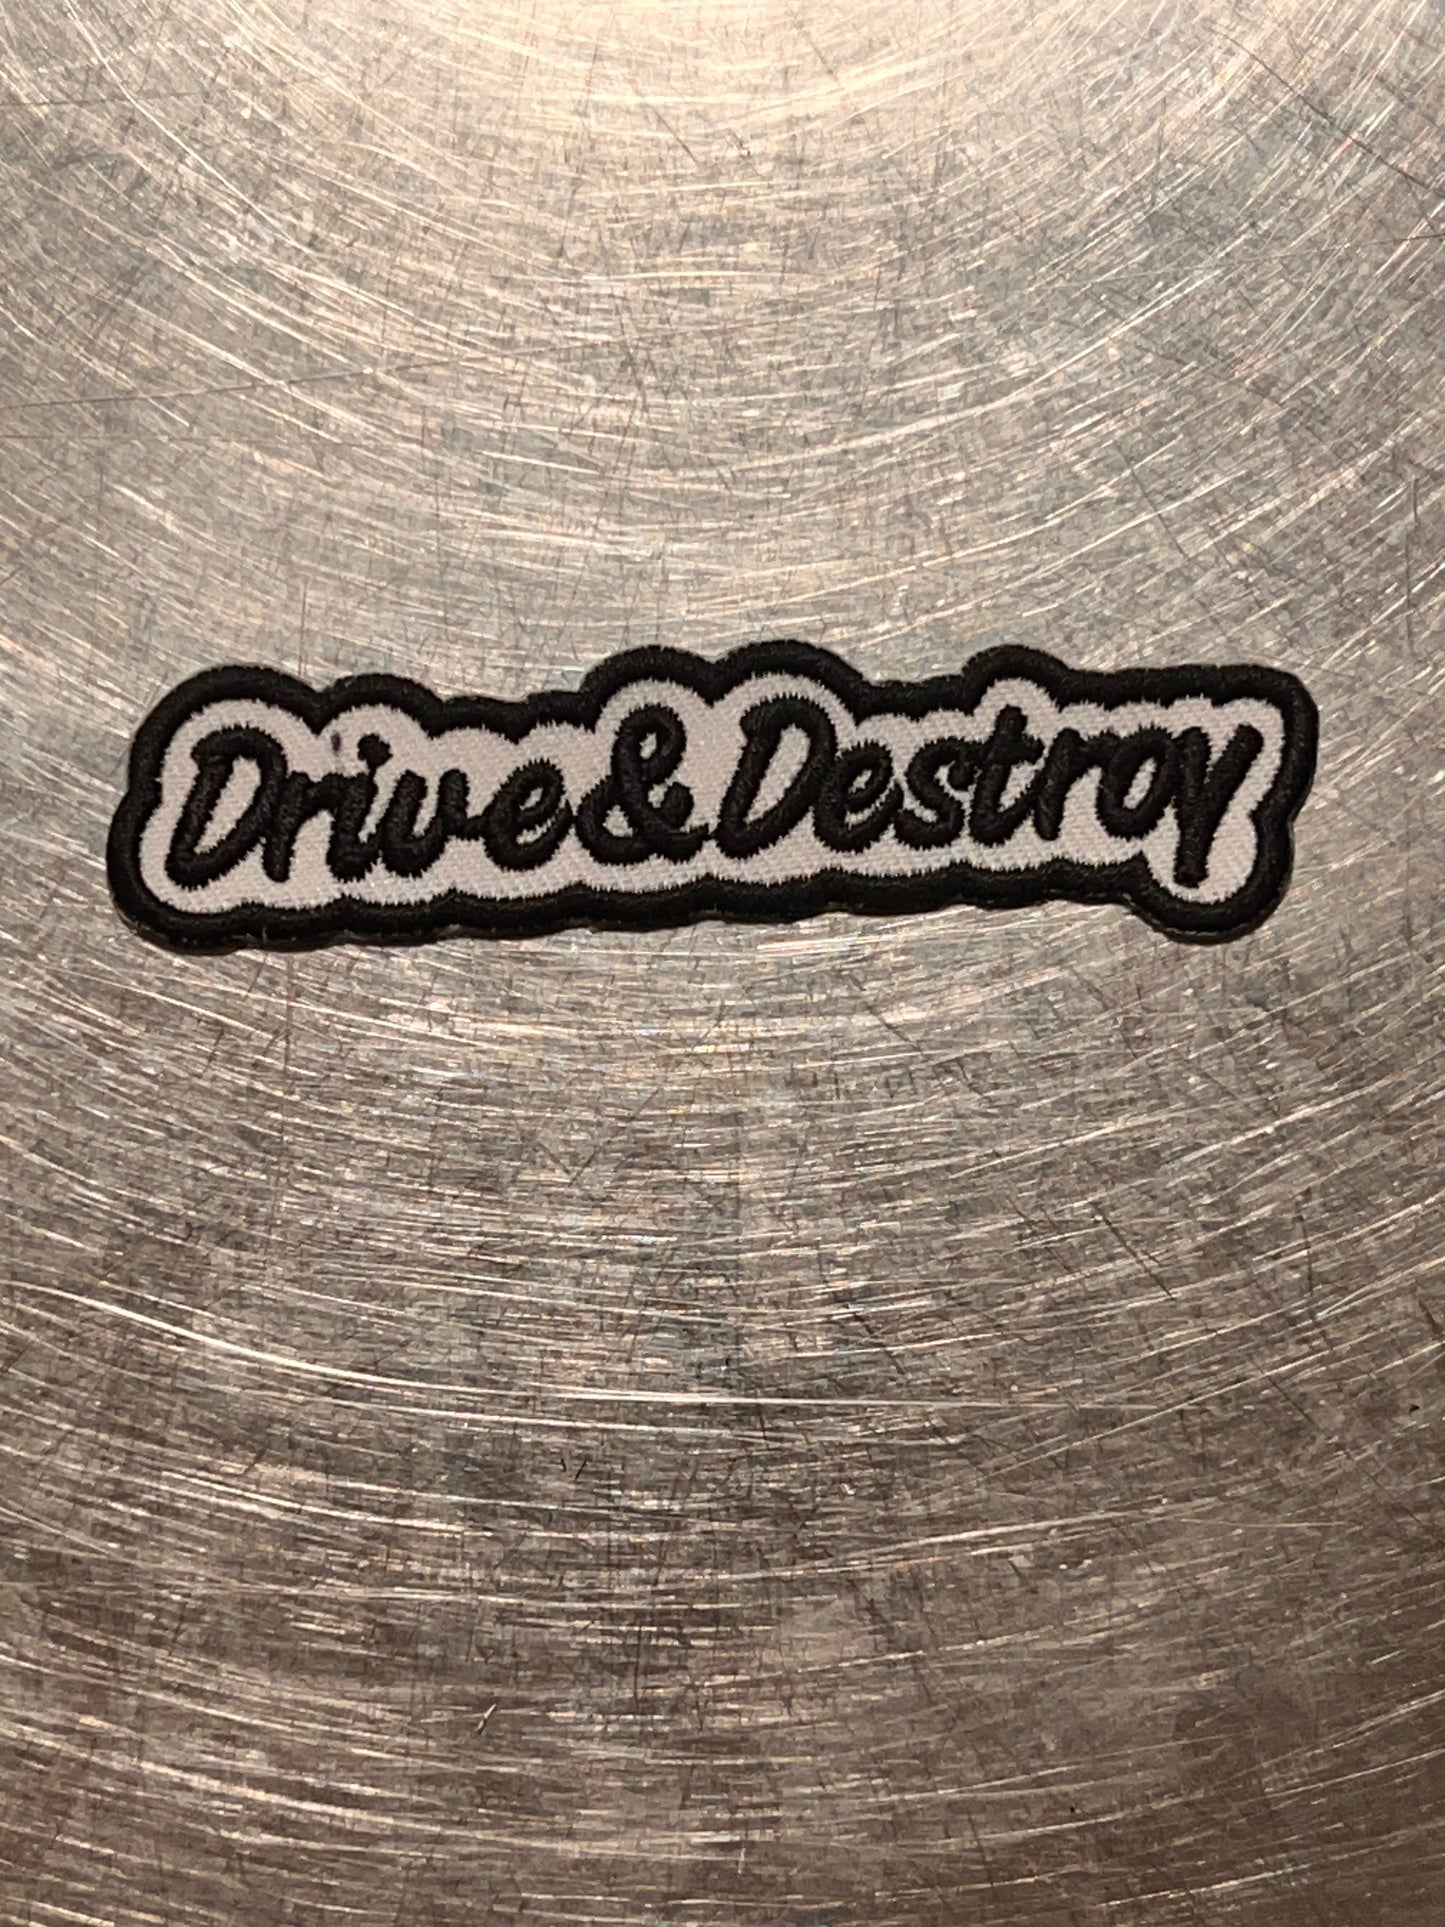 ‘Drive&Destroy’ embroidered patch